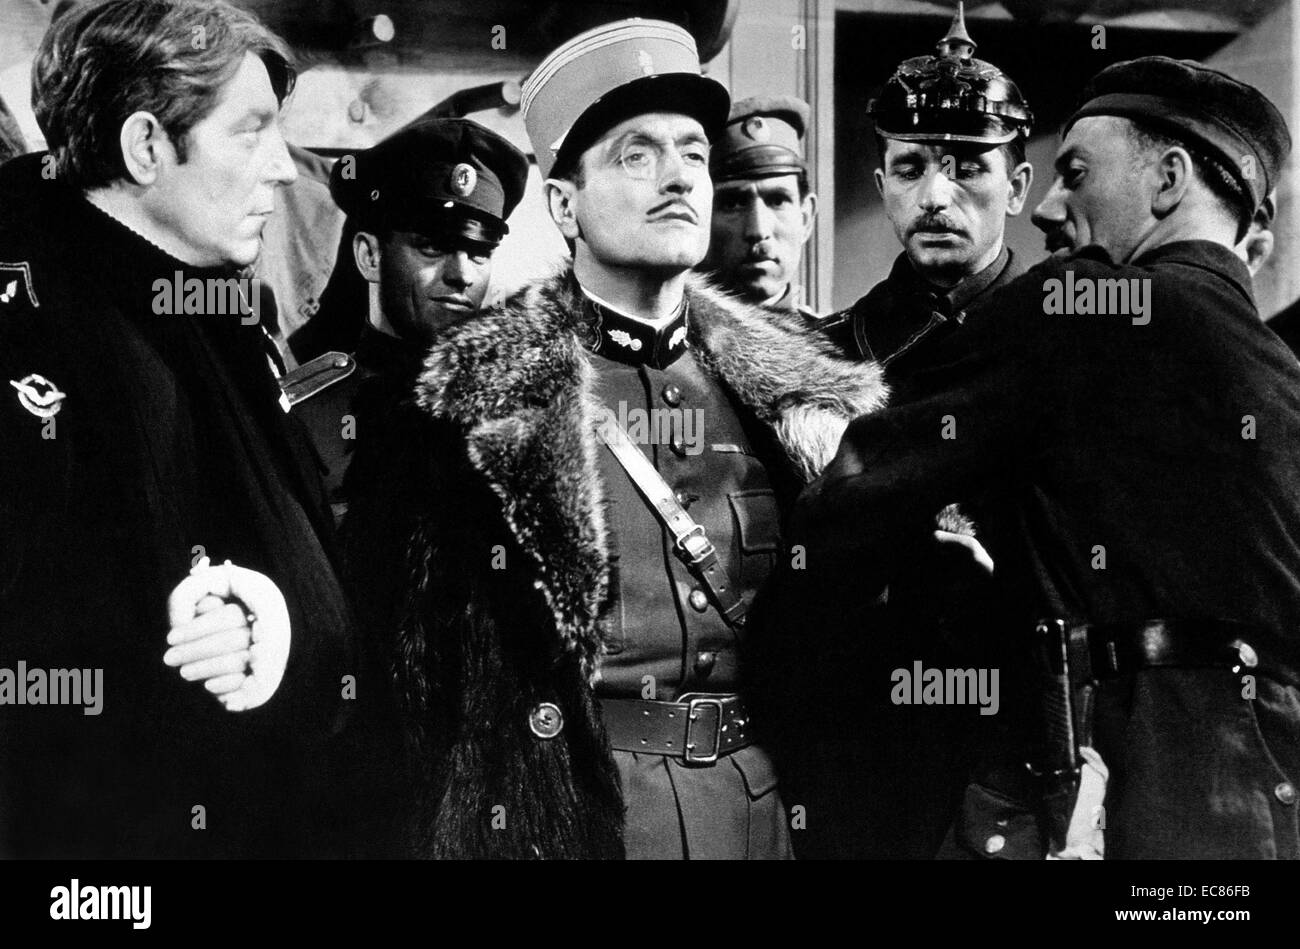 Film still from 'La Grande Illusion' French war film directed by Jean Renoir (1894-1979) staring Jean Gabin, Dita Parlo and Pierre Fresnay. Dated 1937 Stock Photo